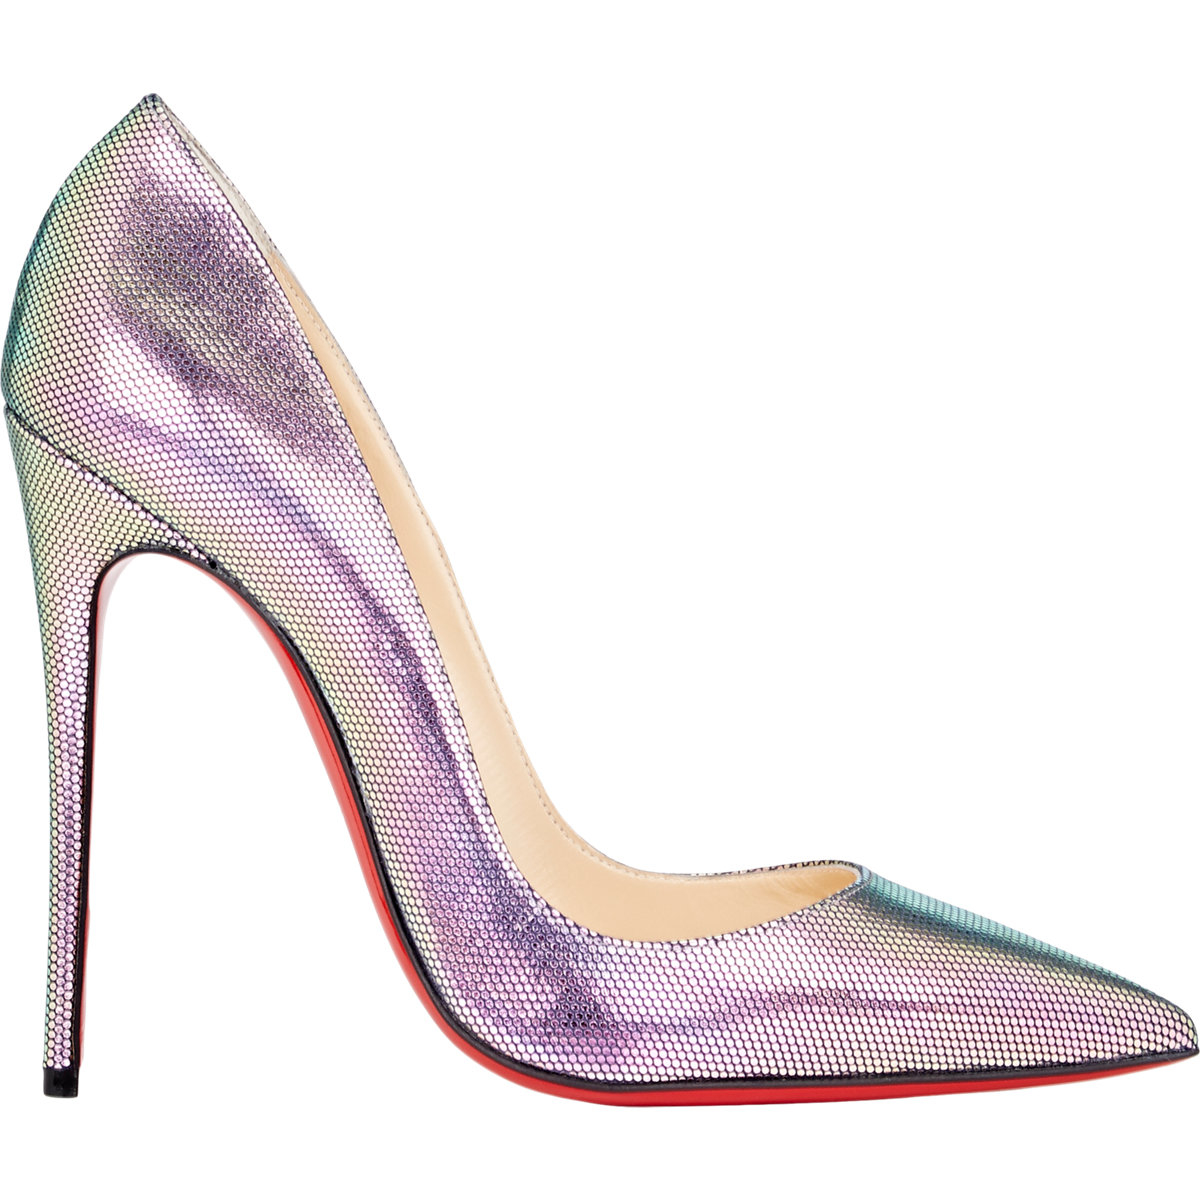 replica louboutins - Christian louboutin So Kate Pumps in Multicolor (Multi) | Lyst